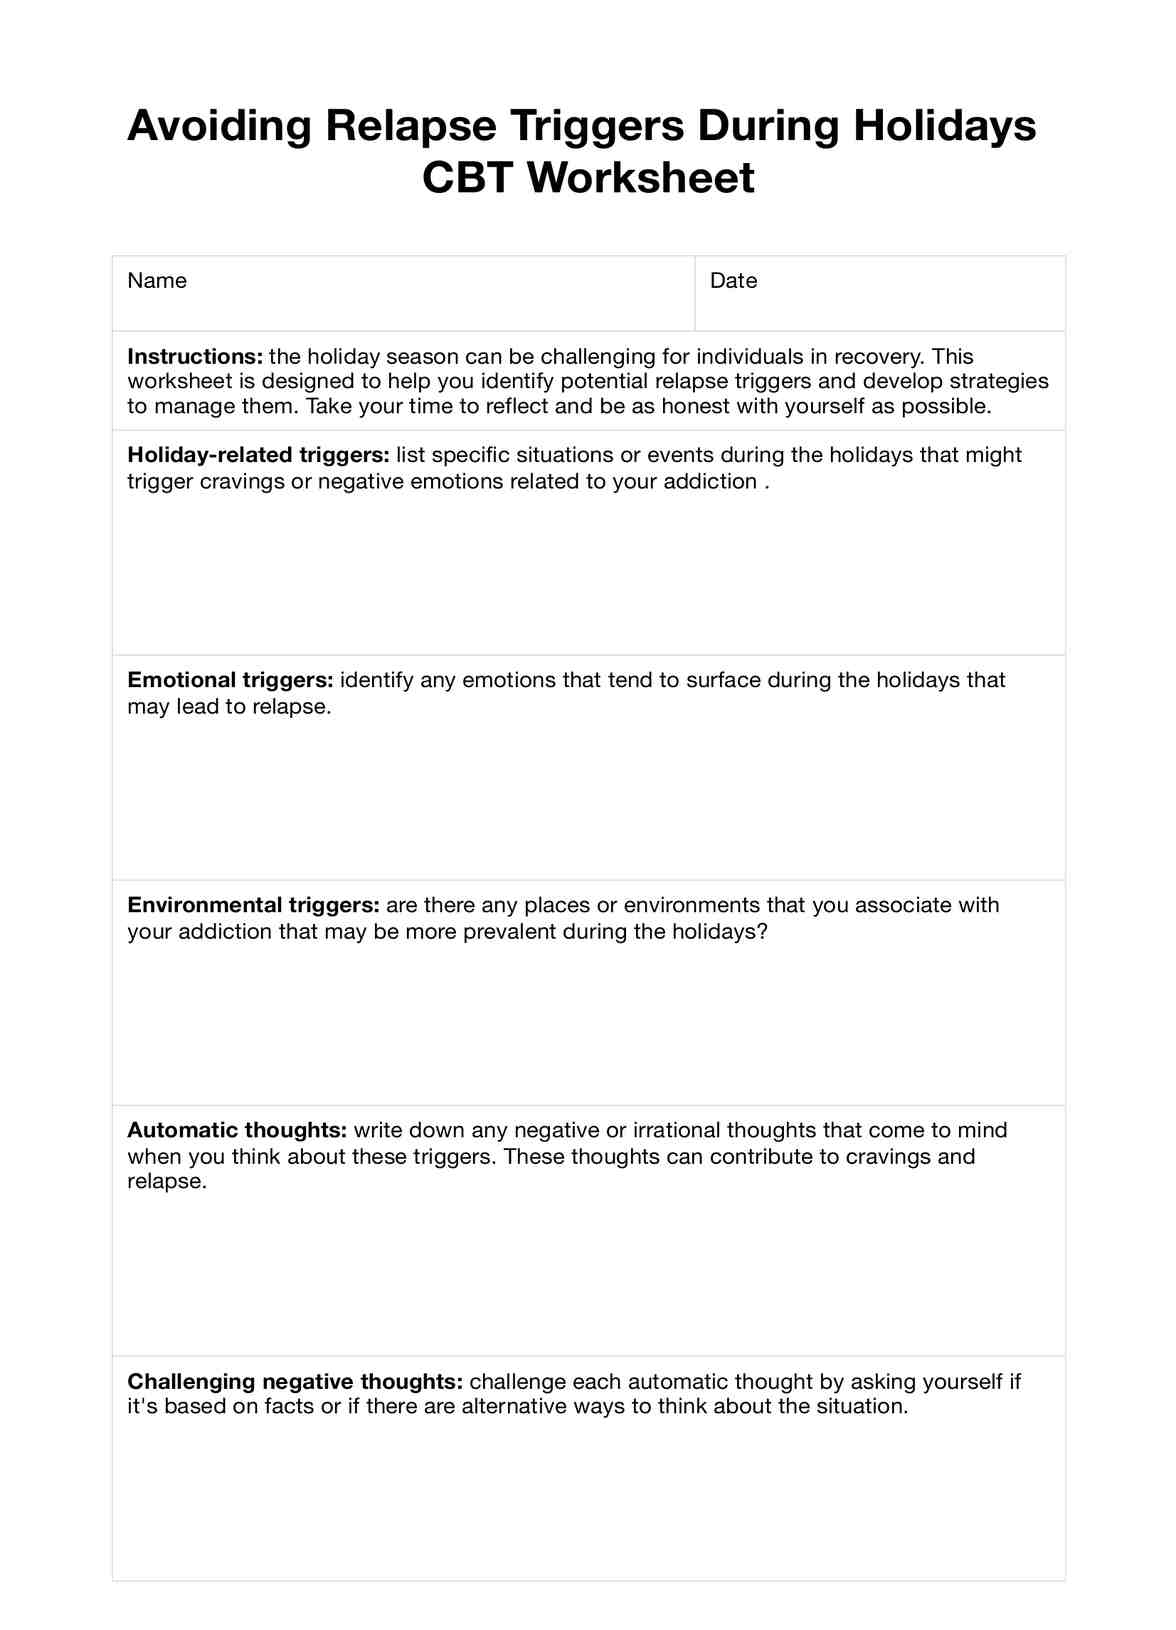 Avoiding Relapse Triggers During Holidays CBT Worksheets PDF Example